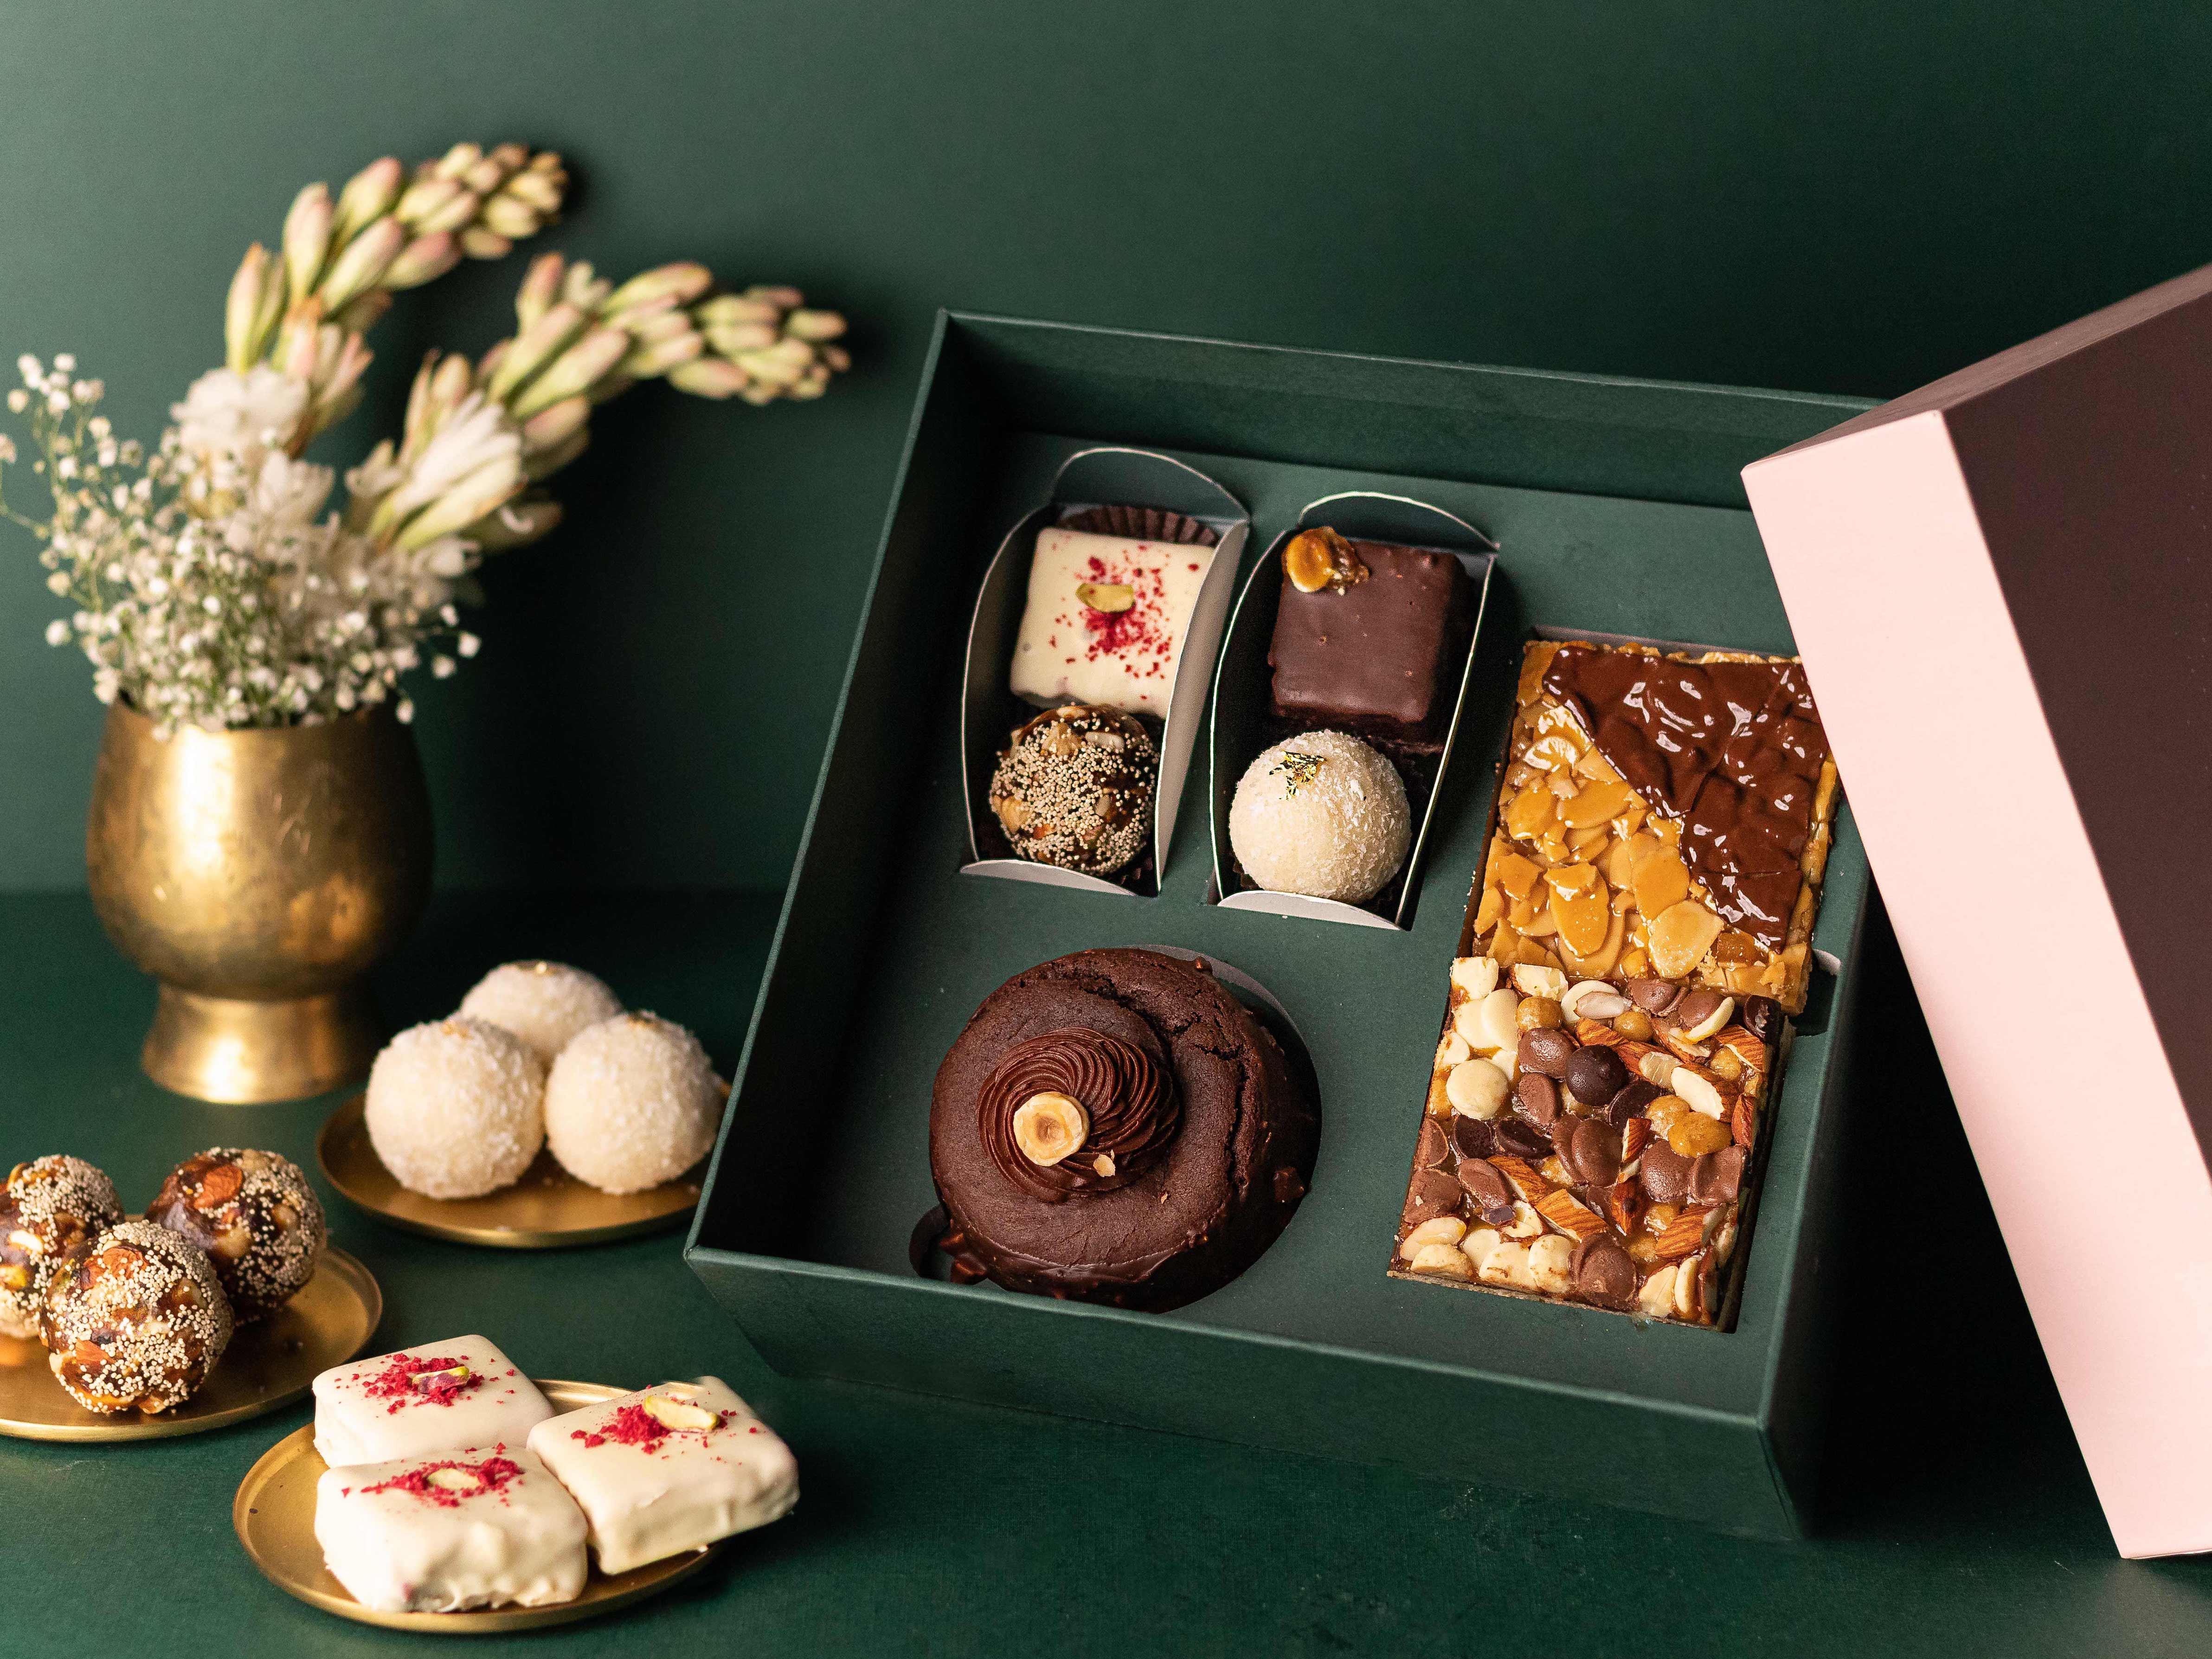 Sweeten up this Diwali with Patasa’s Artisanal Mithai & Chocolate boxes and Gifting Hampers